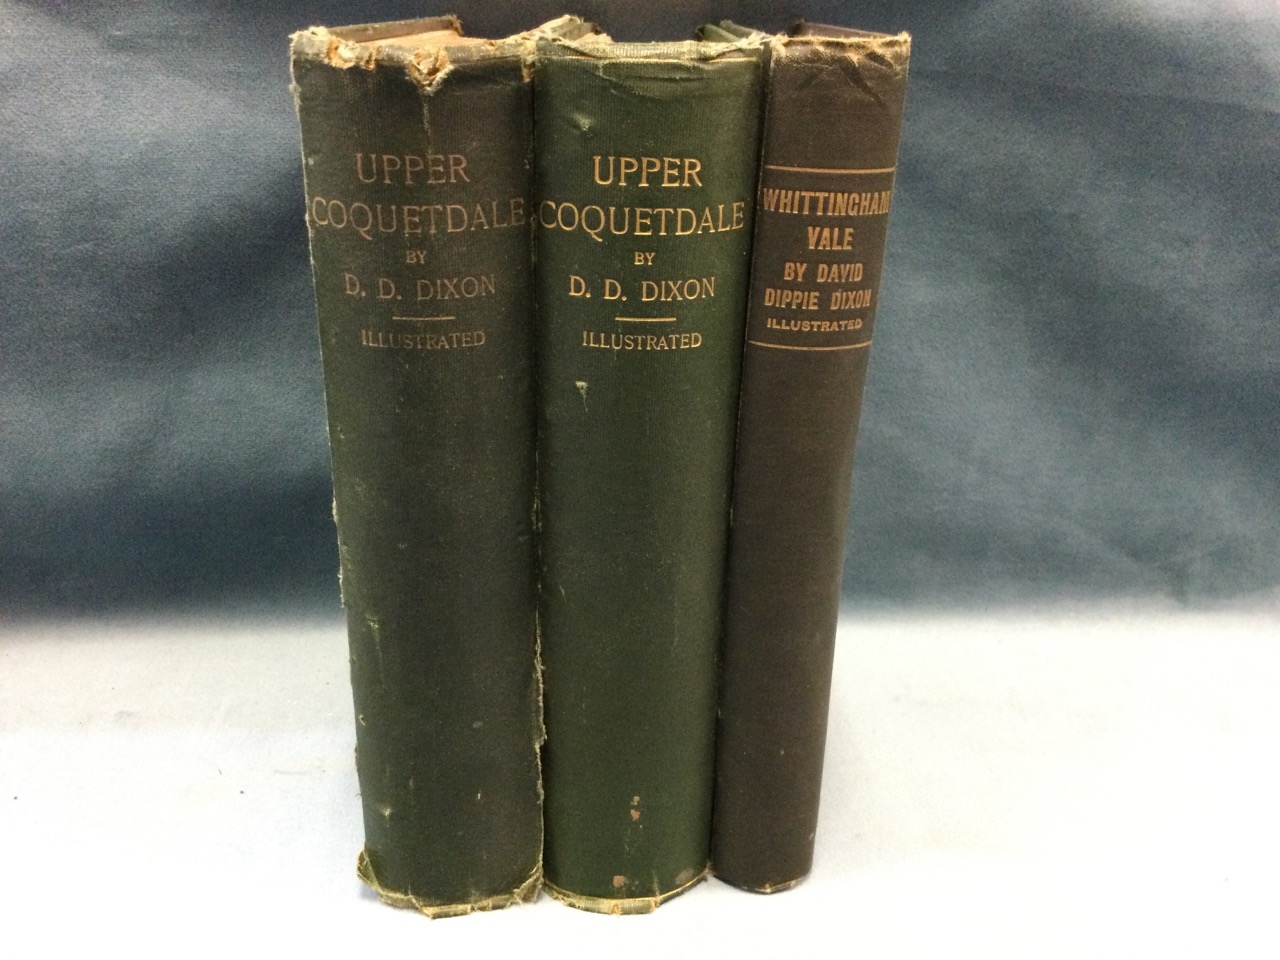 Upper Coquetdale by David Dippie Dixon, fully illustrated and clothbound with gilt tooling,